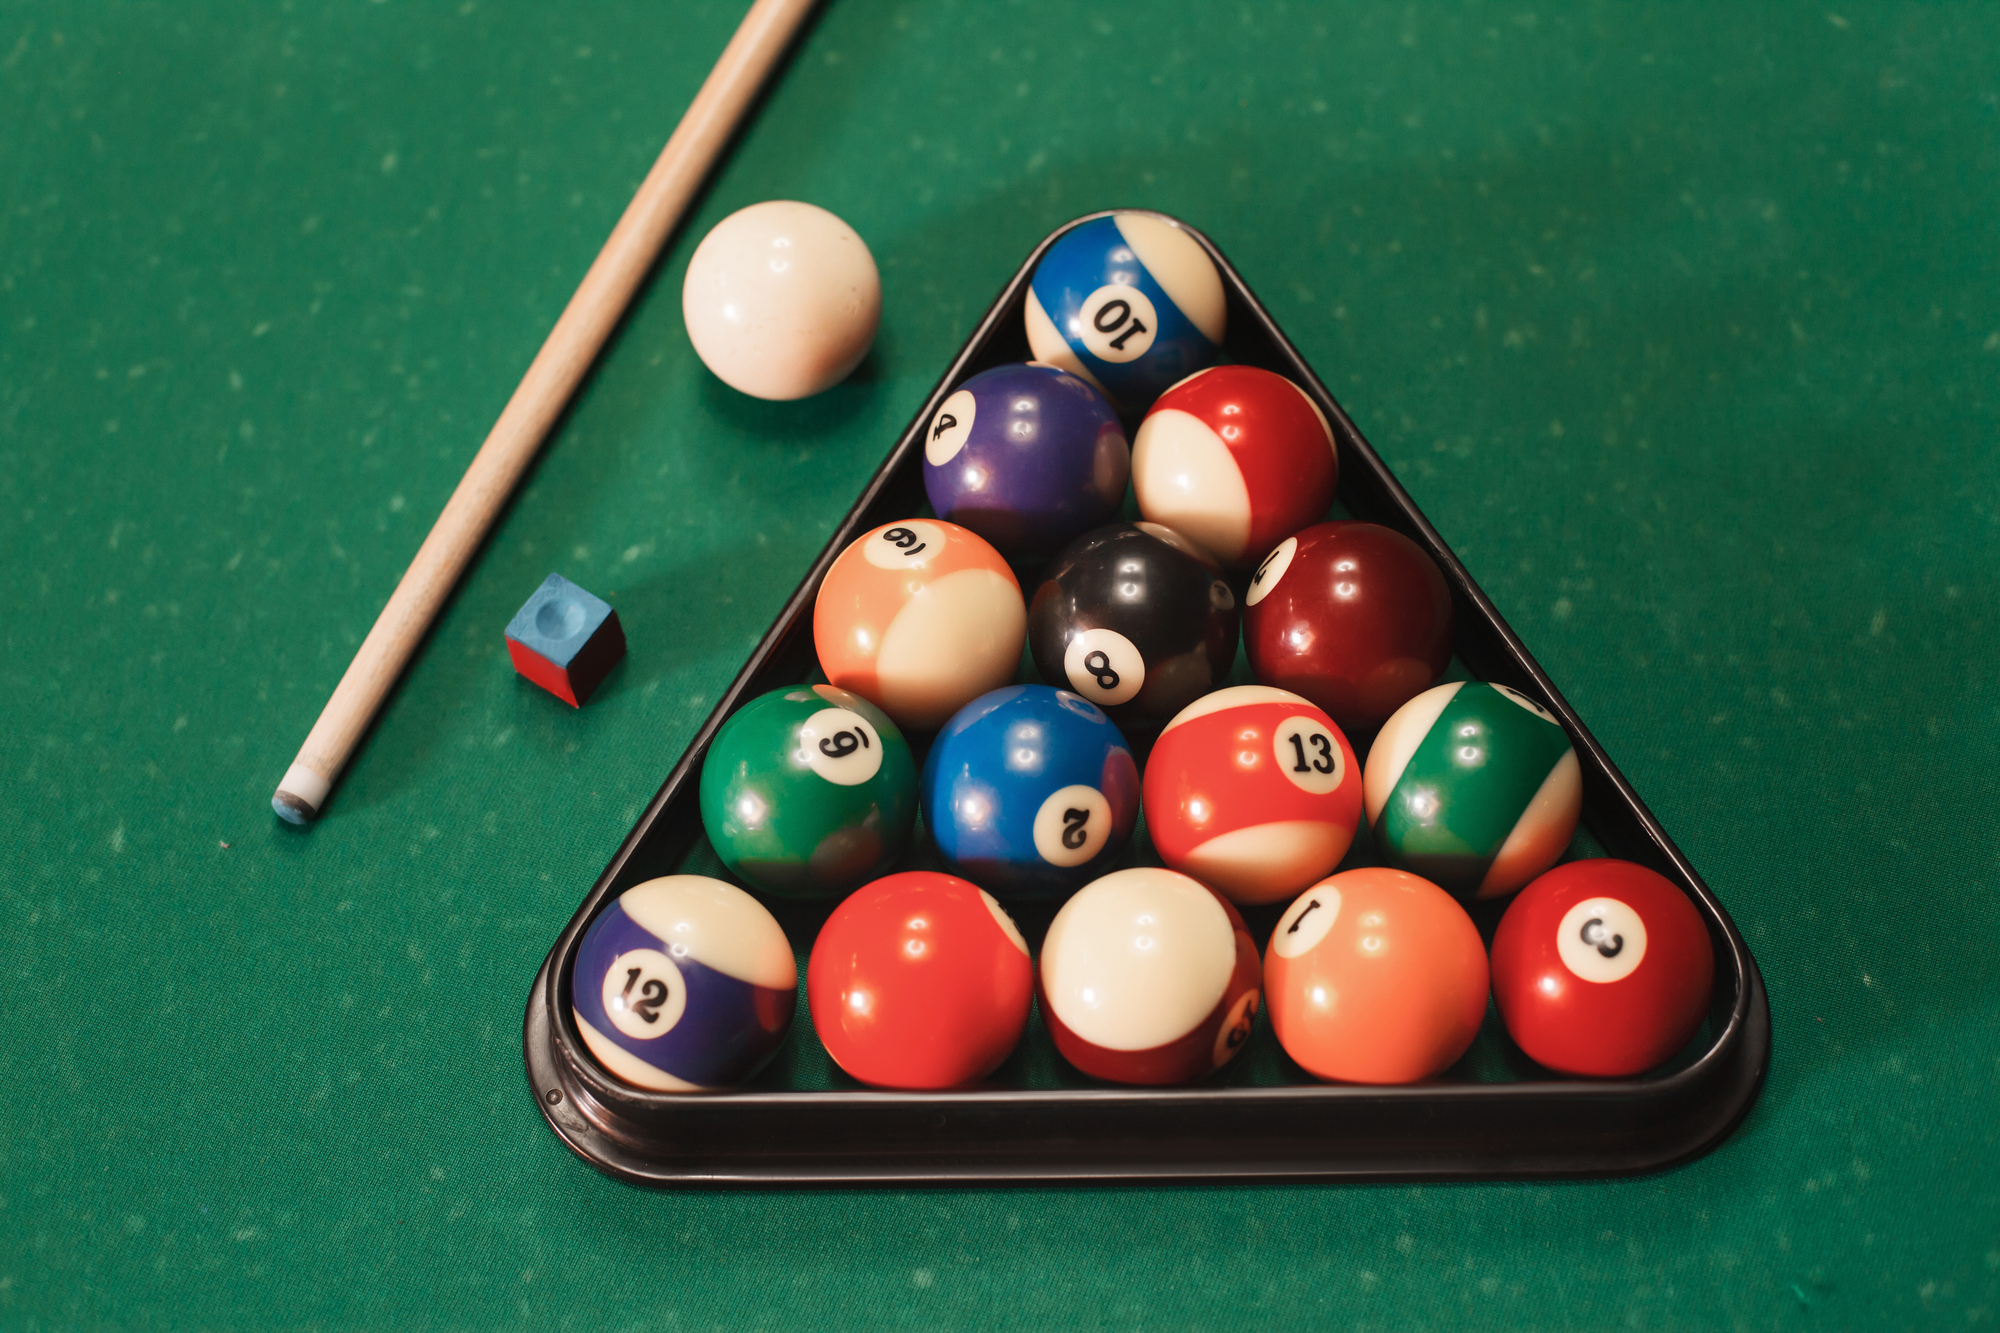 An image of pool table balls in a rack along with a cue ball, cue stick, and chalk on a pool table